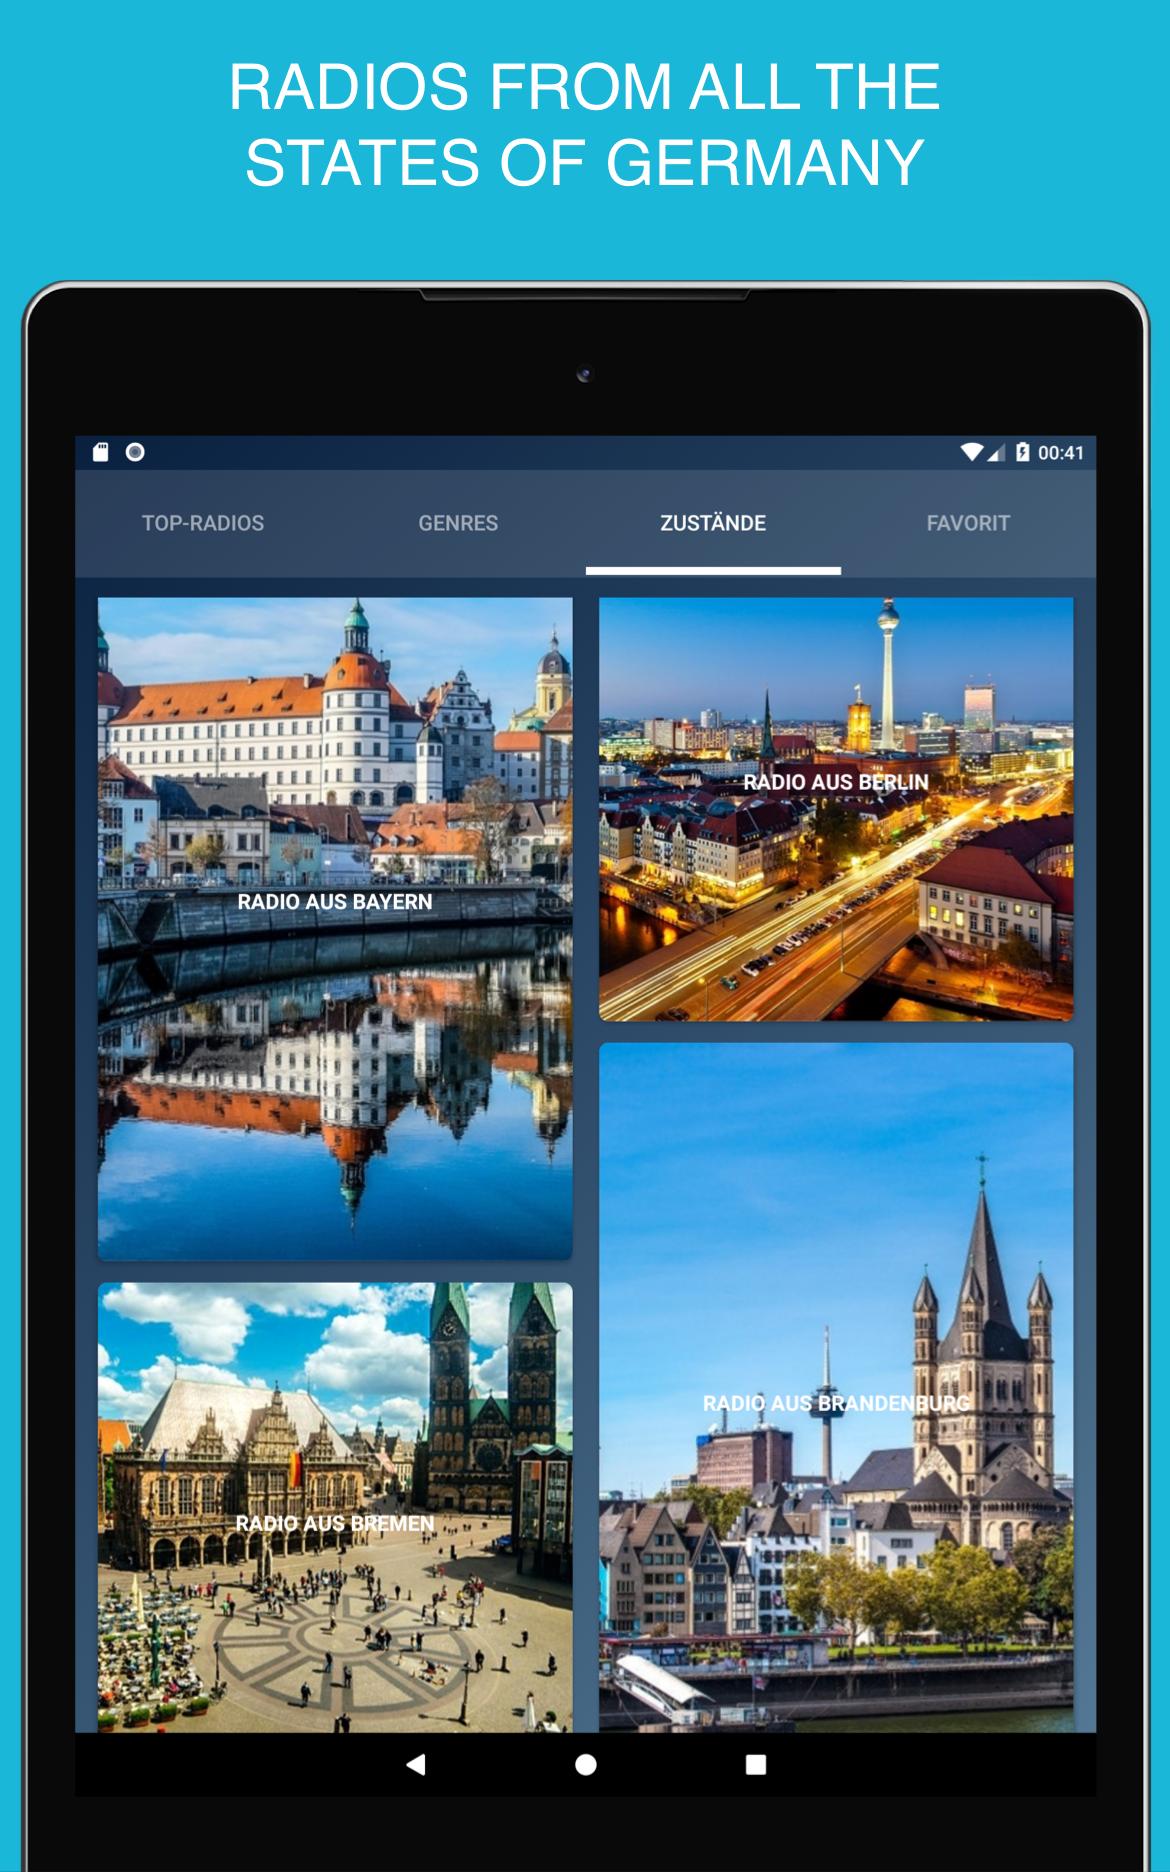 Radio Gong Würzburg 106.9 App FM Kostenlos for Android - APK Download